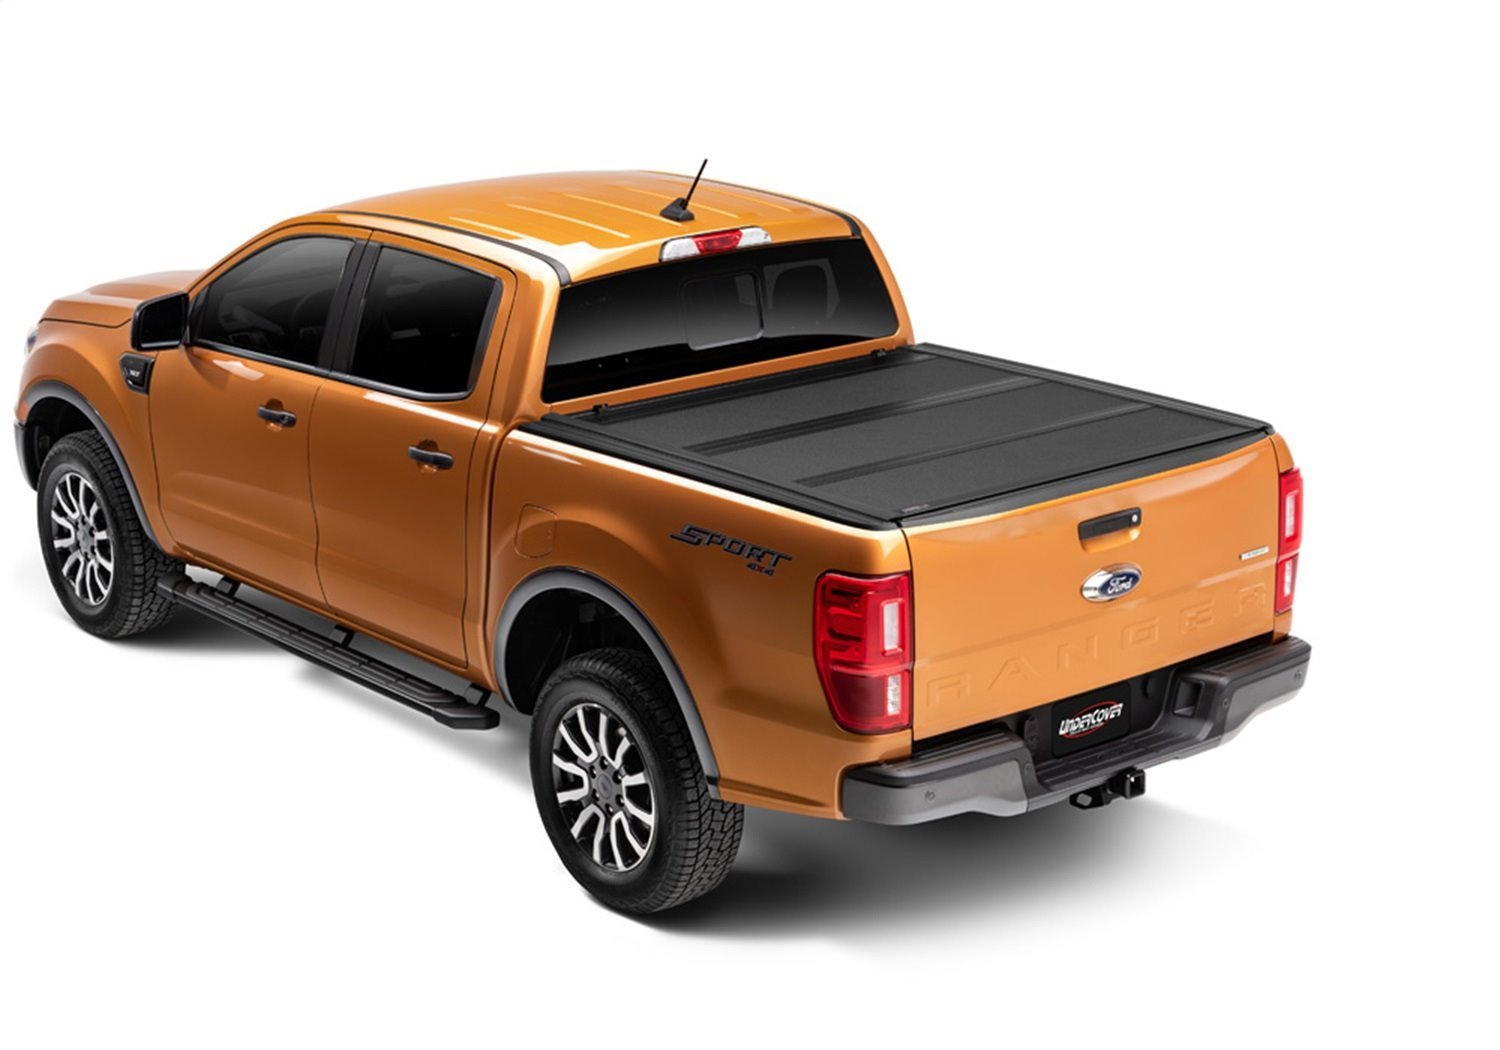 AX22022 Armor Flex Hard Folding Cover, Fits Select Ford Ranger Crew Cab, 5'Bed, Black Textured